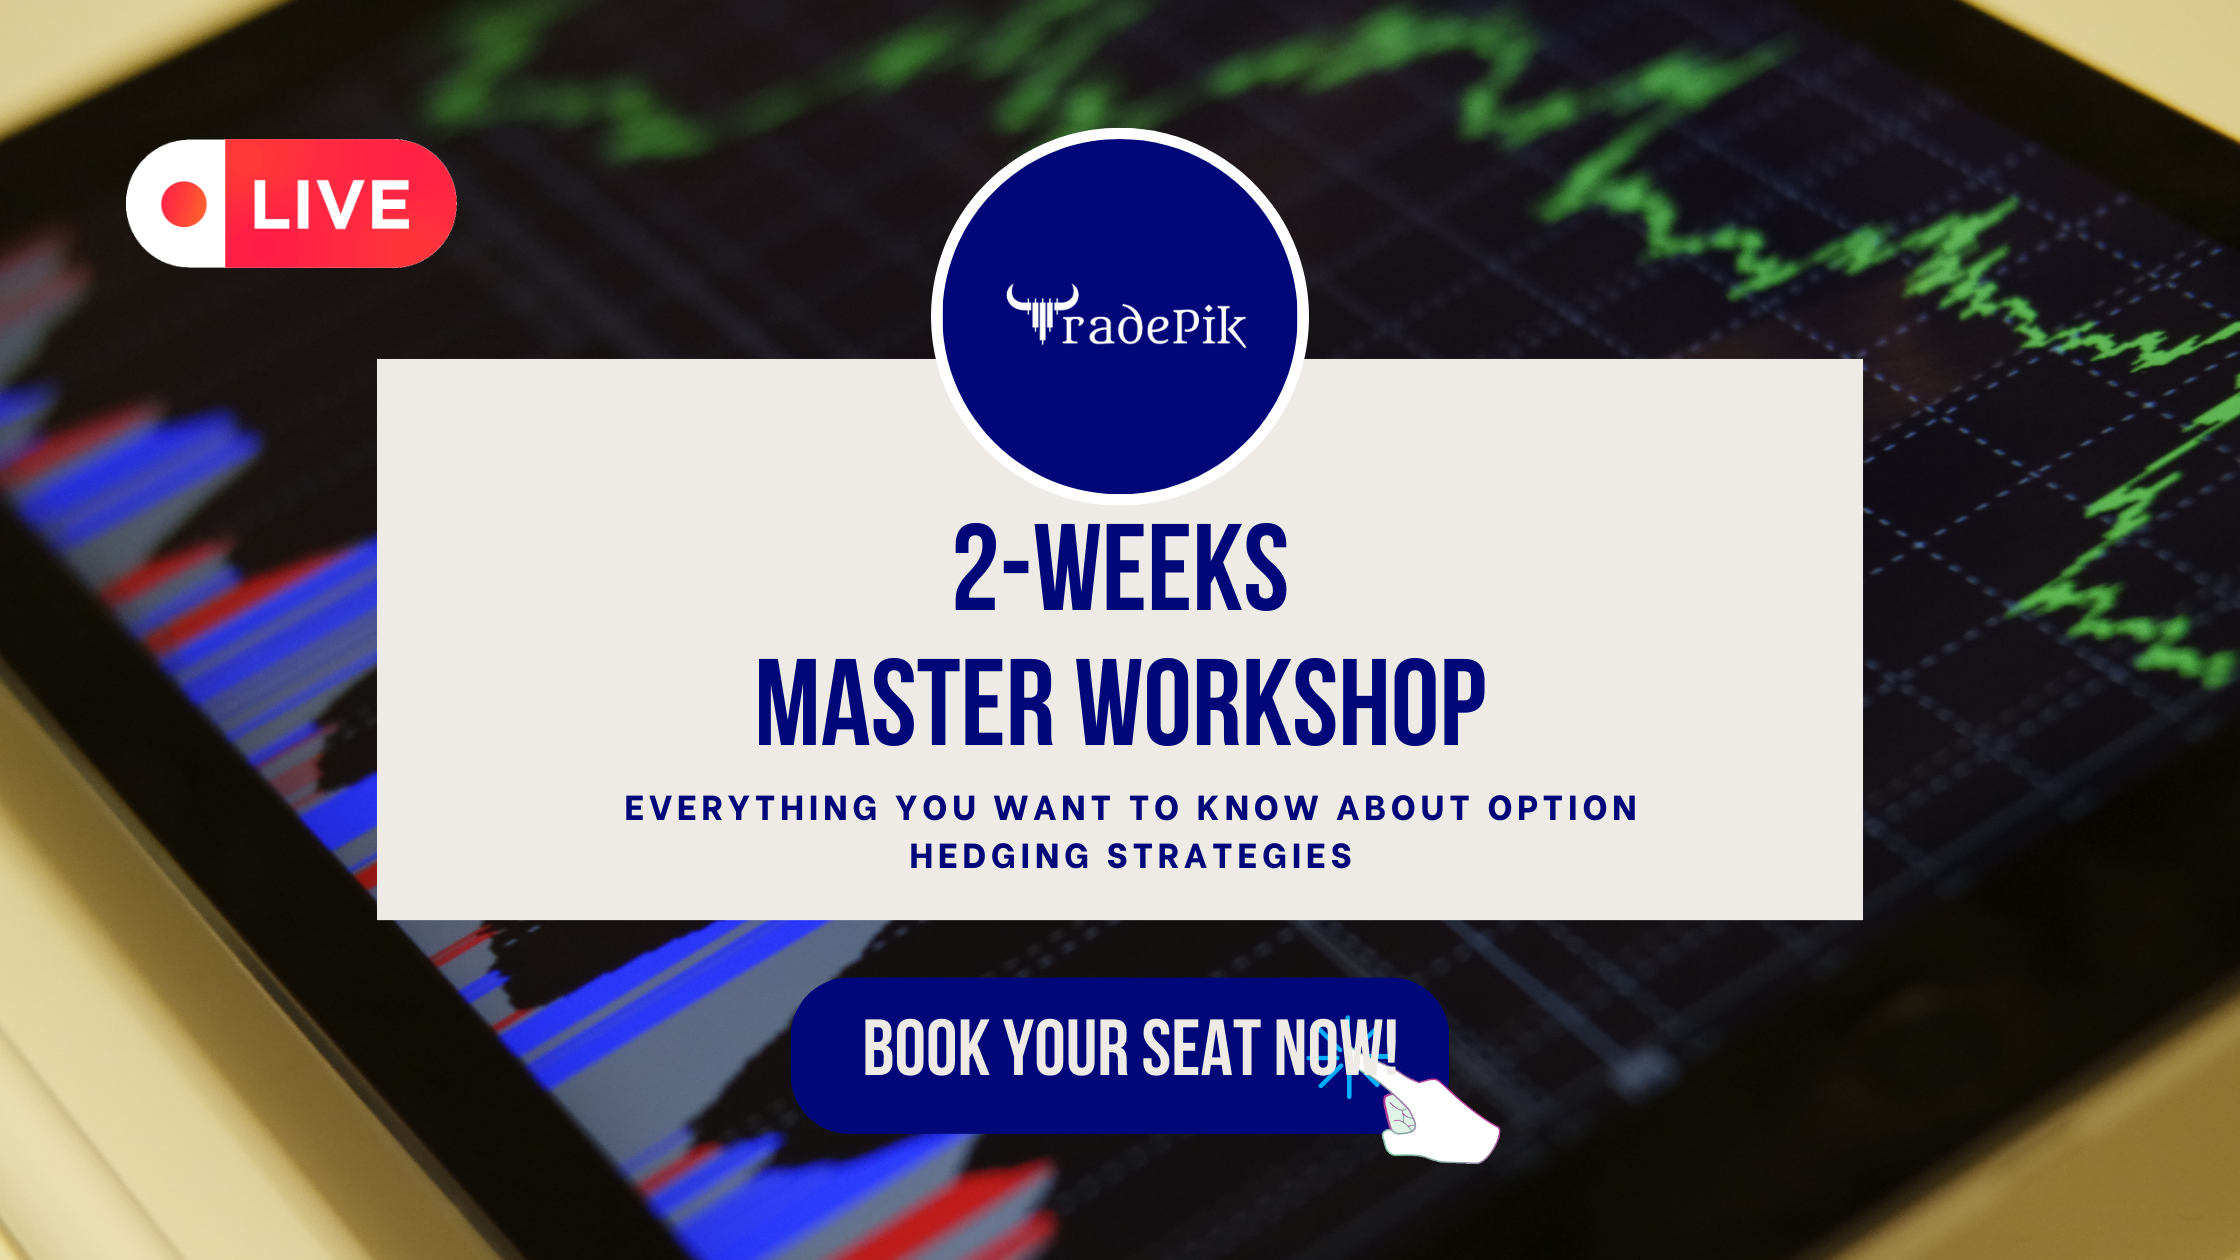 Gain Expertise in Options Strategies with our Exclusive Masterclass